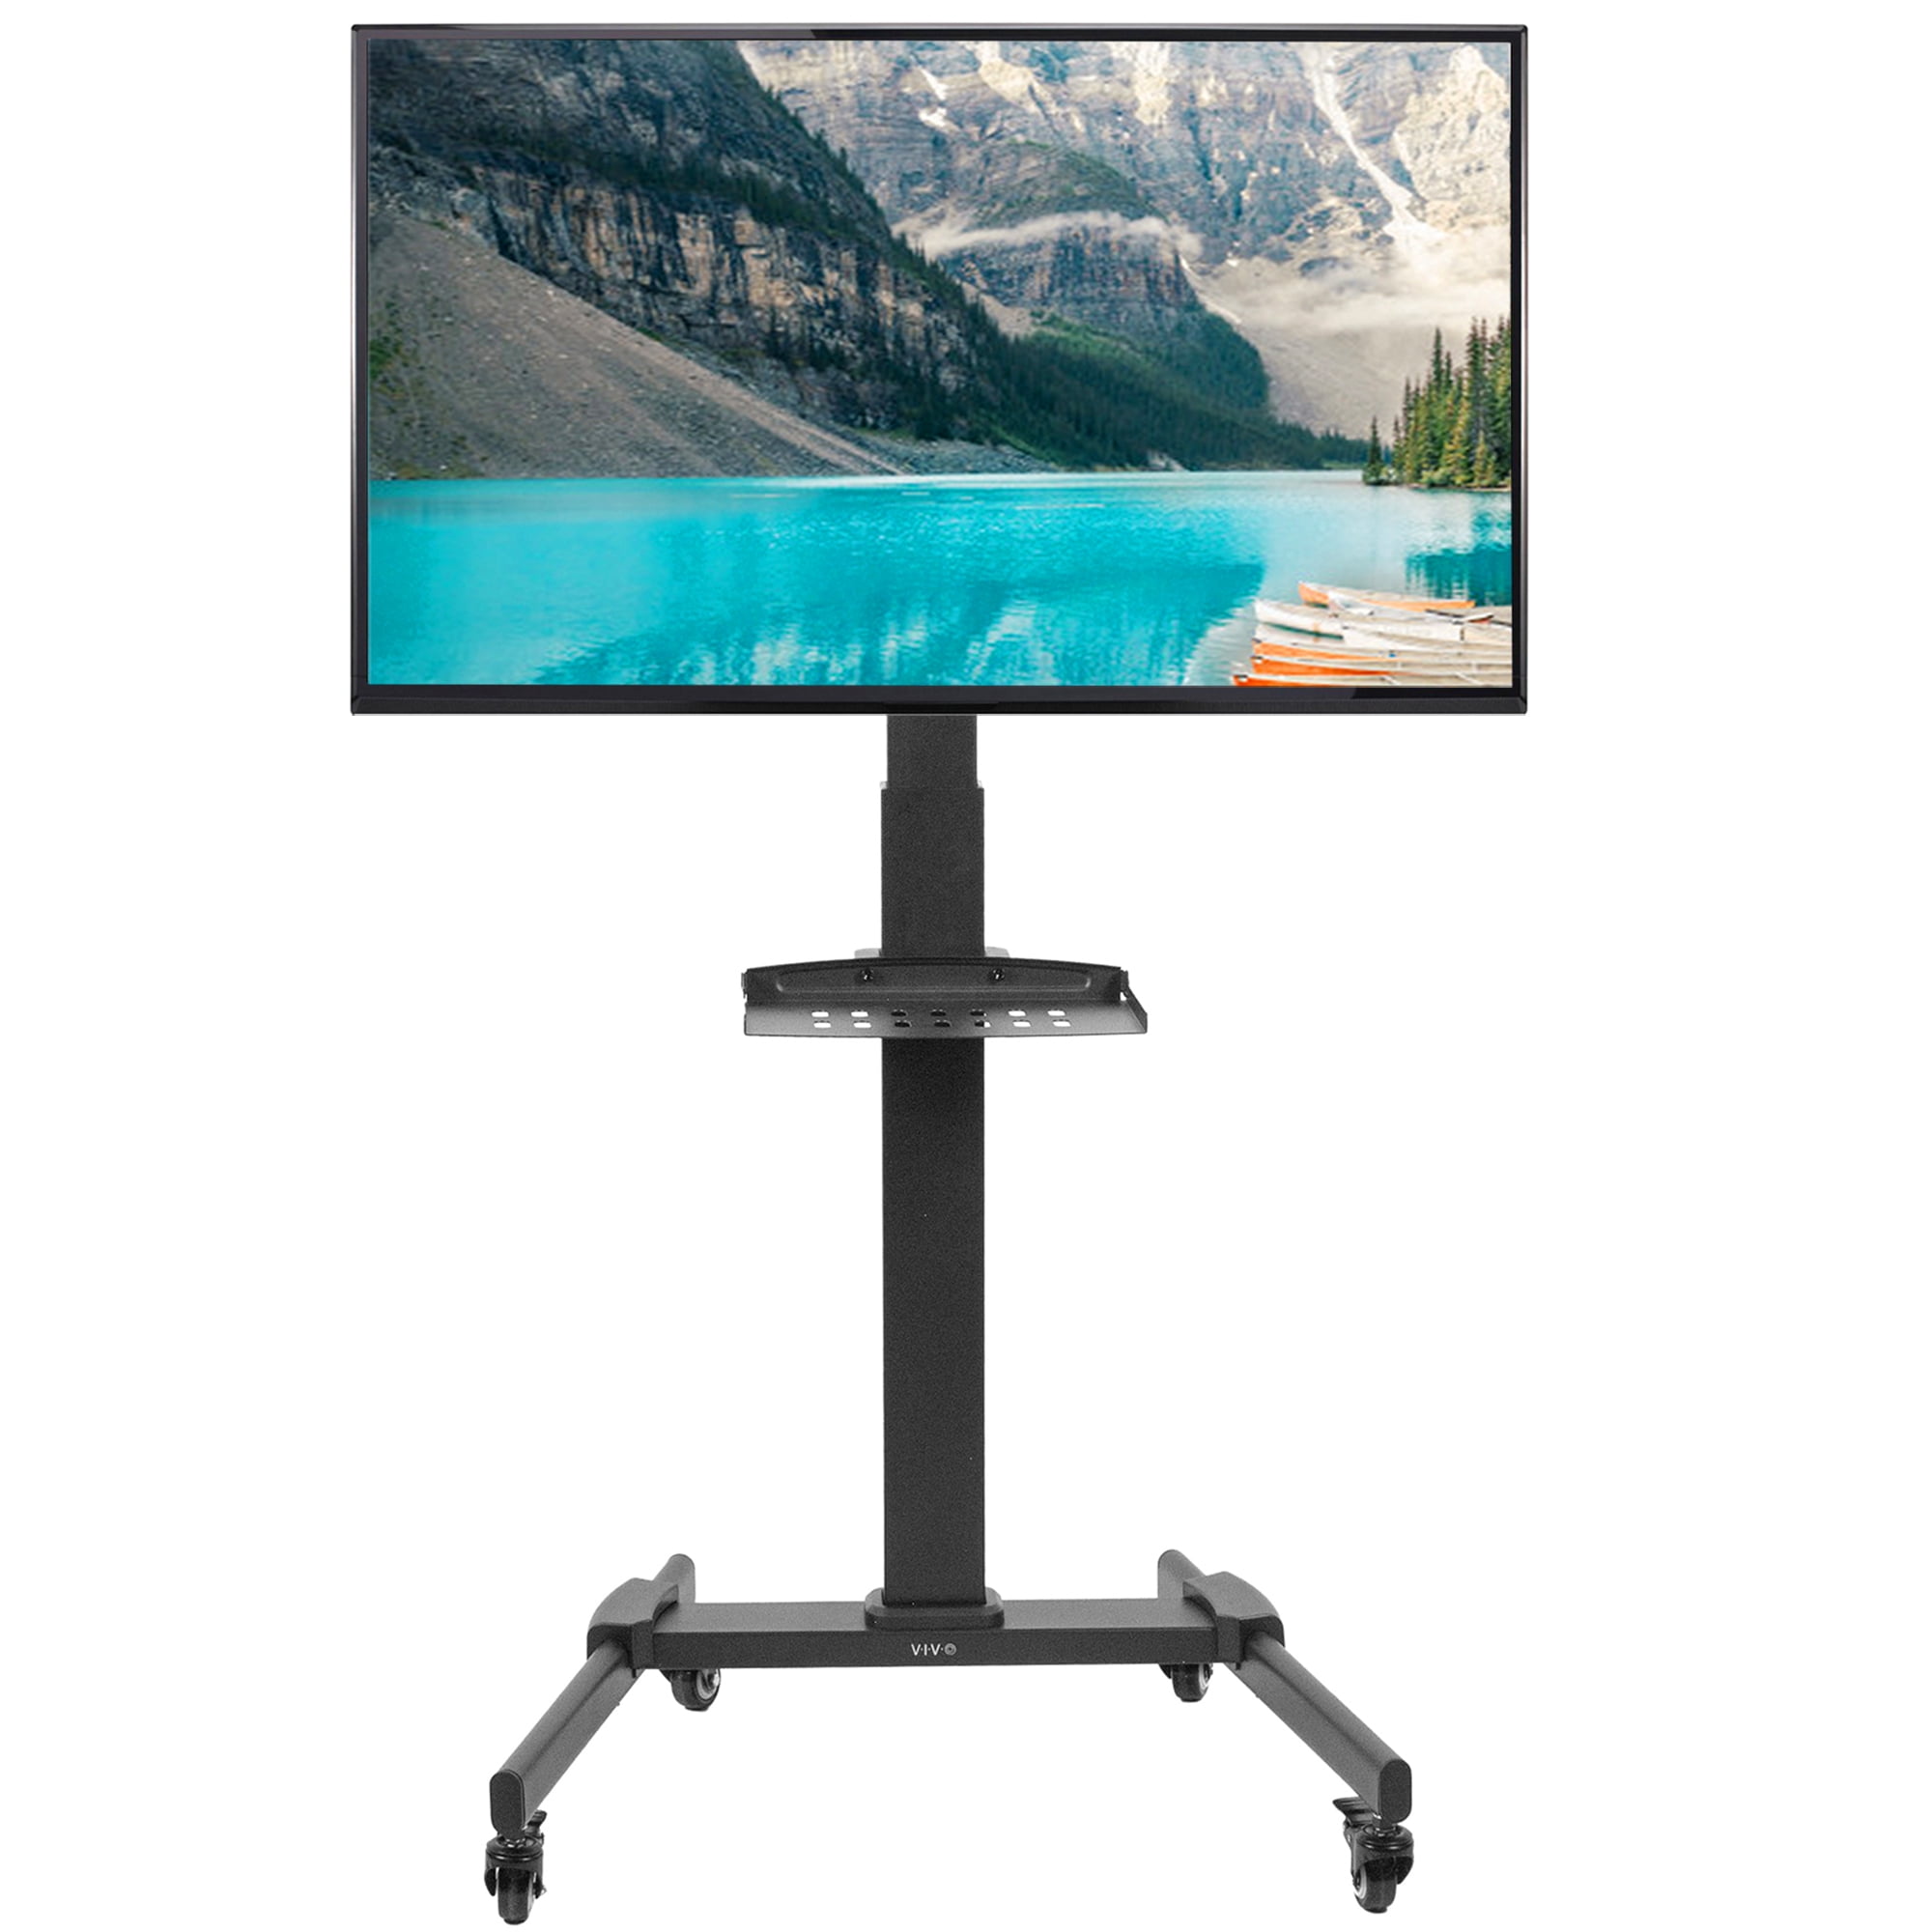 Details about   Adjustable TV Cart Rolling Stand Mount 32-70in Plasma LCD LED Screen with Wheels 